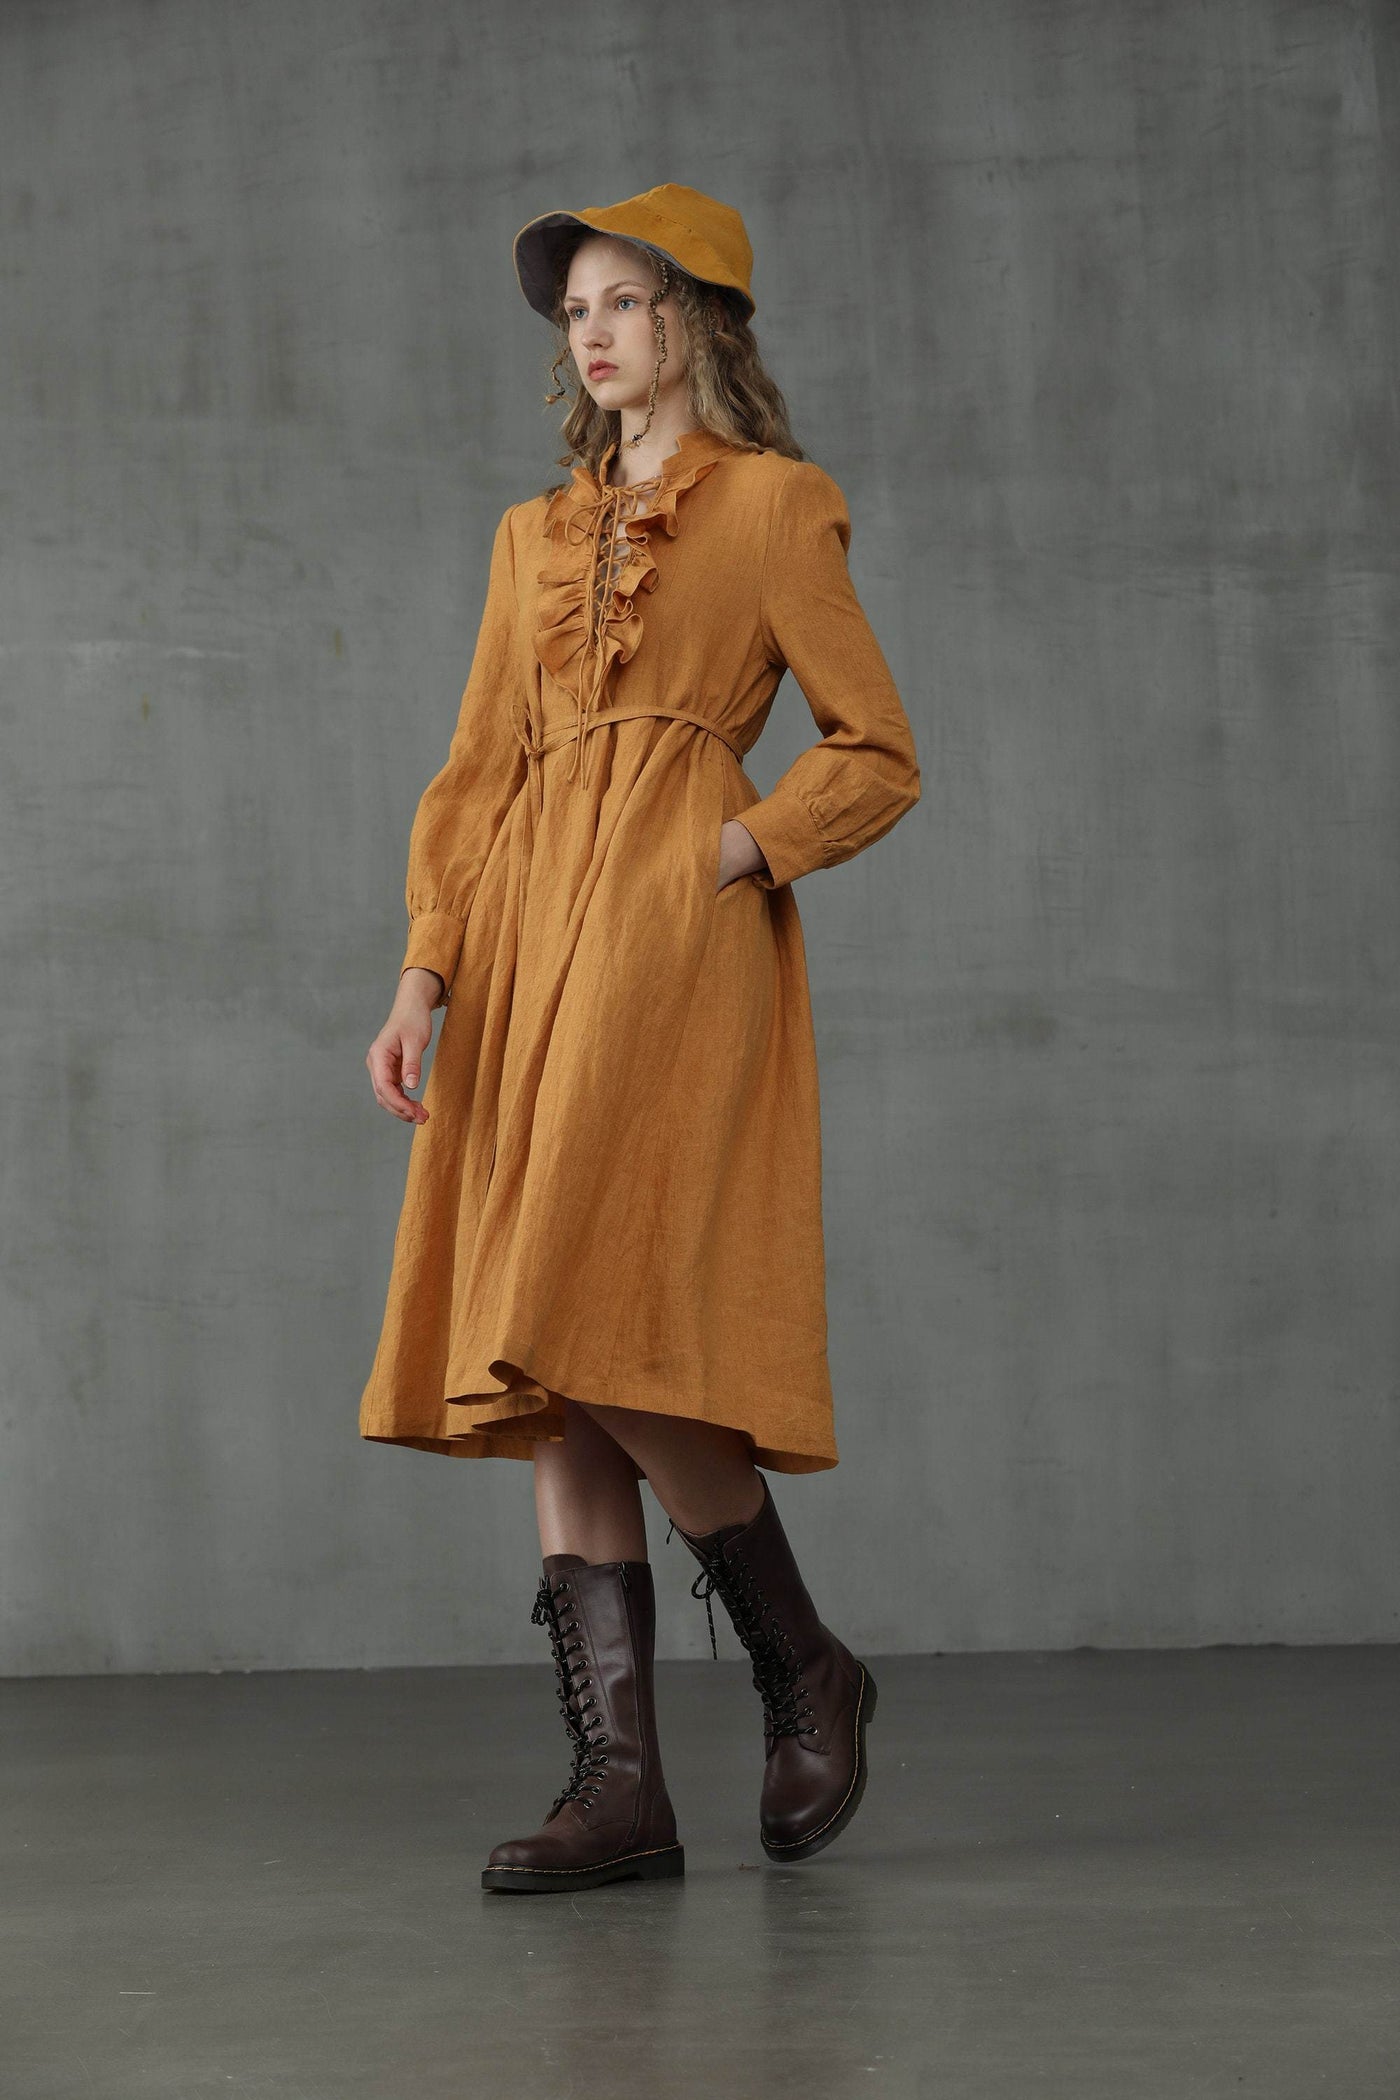 Lady Pearl 17 | Lace-up Linen Dress